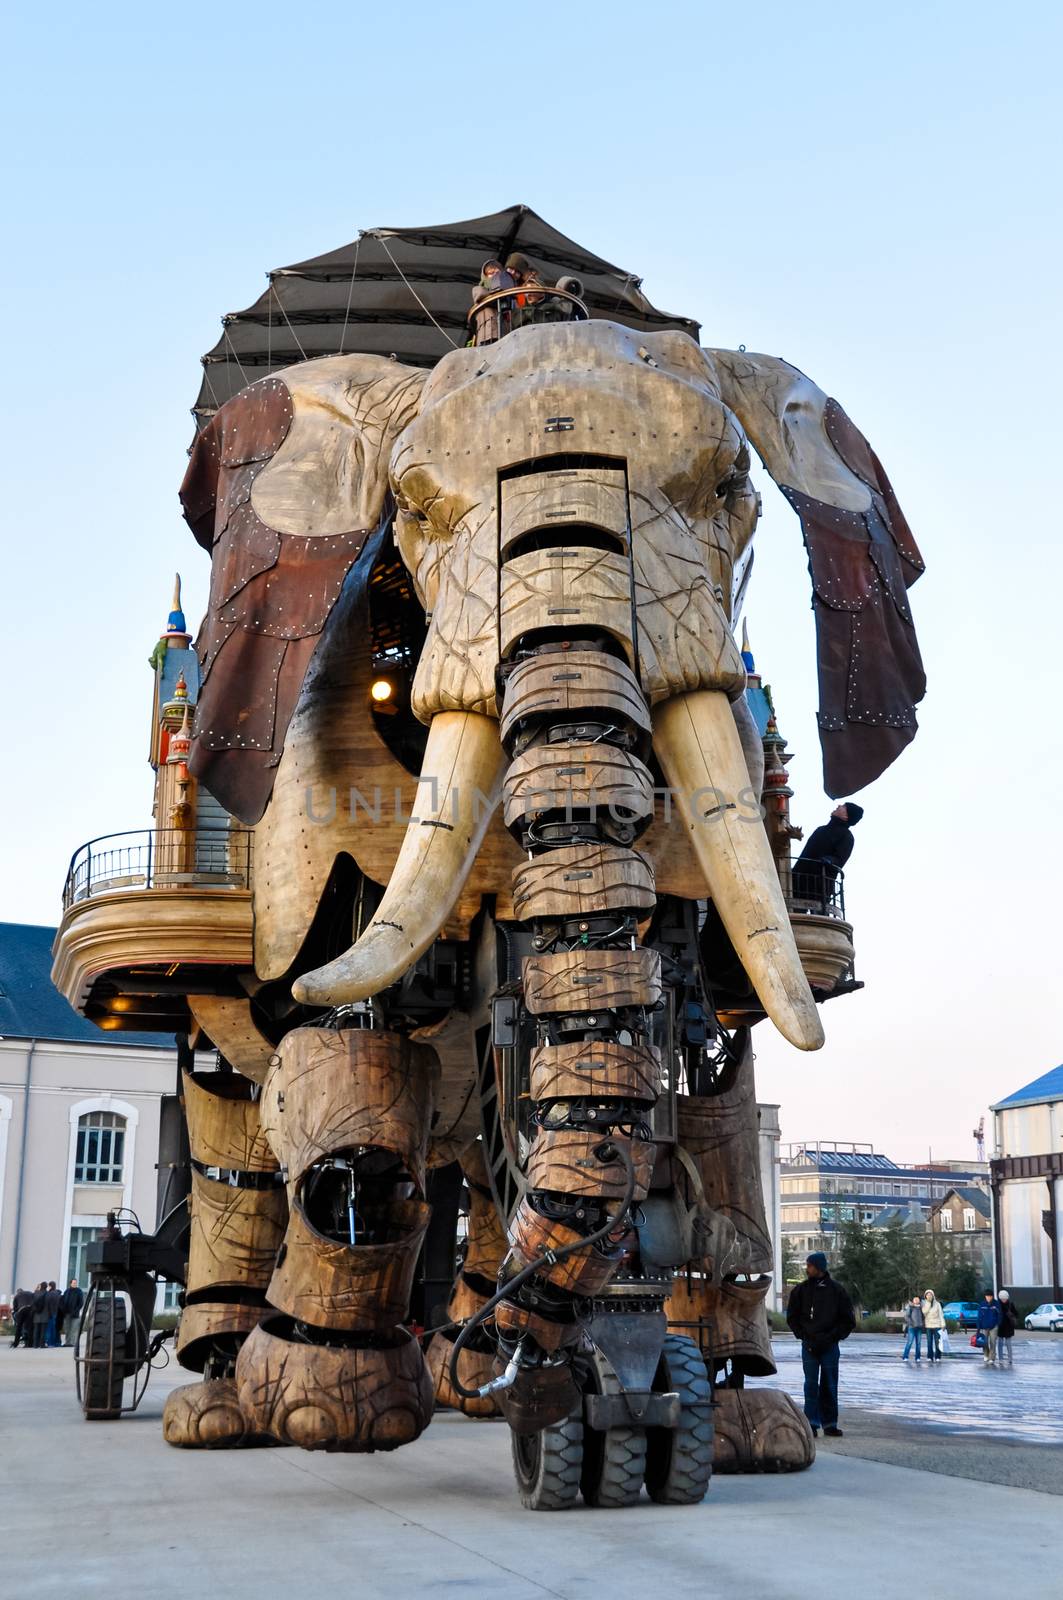 The Great Elephant  in Nantes by dutourdumonde